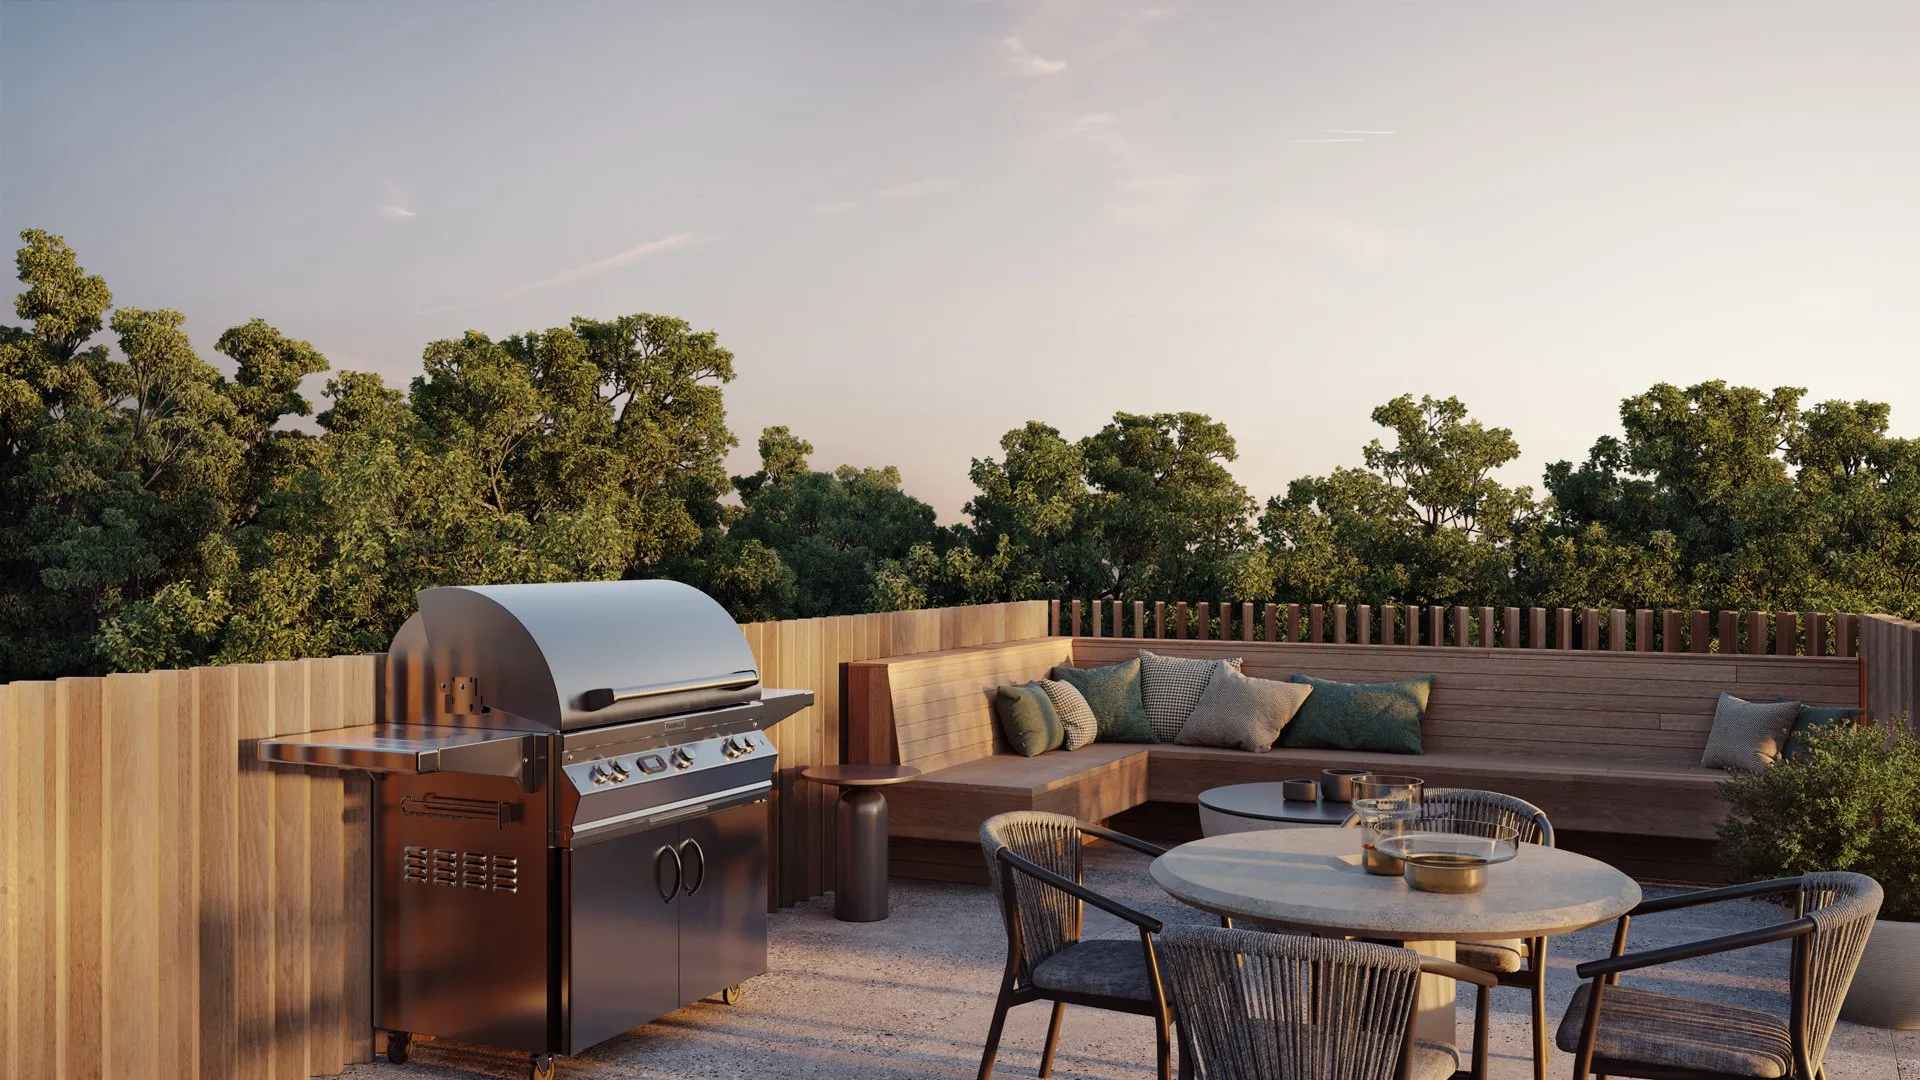 Select homes have a private rooftop deck with city views and ample space to entertain.